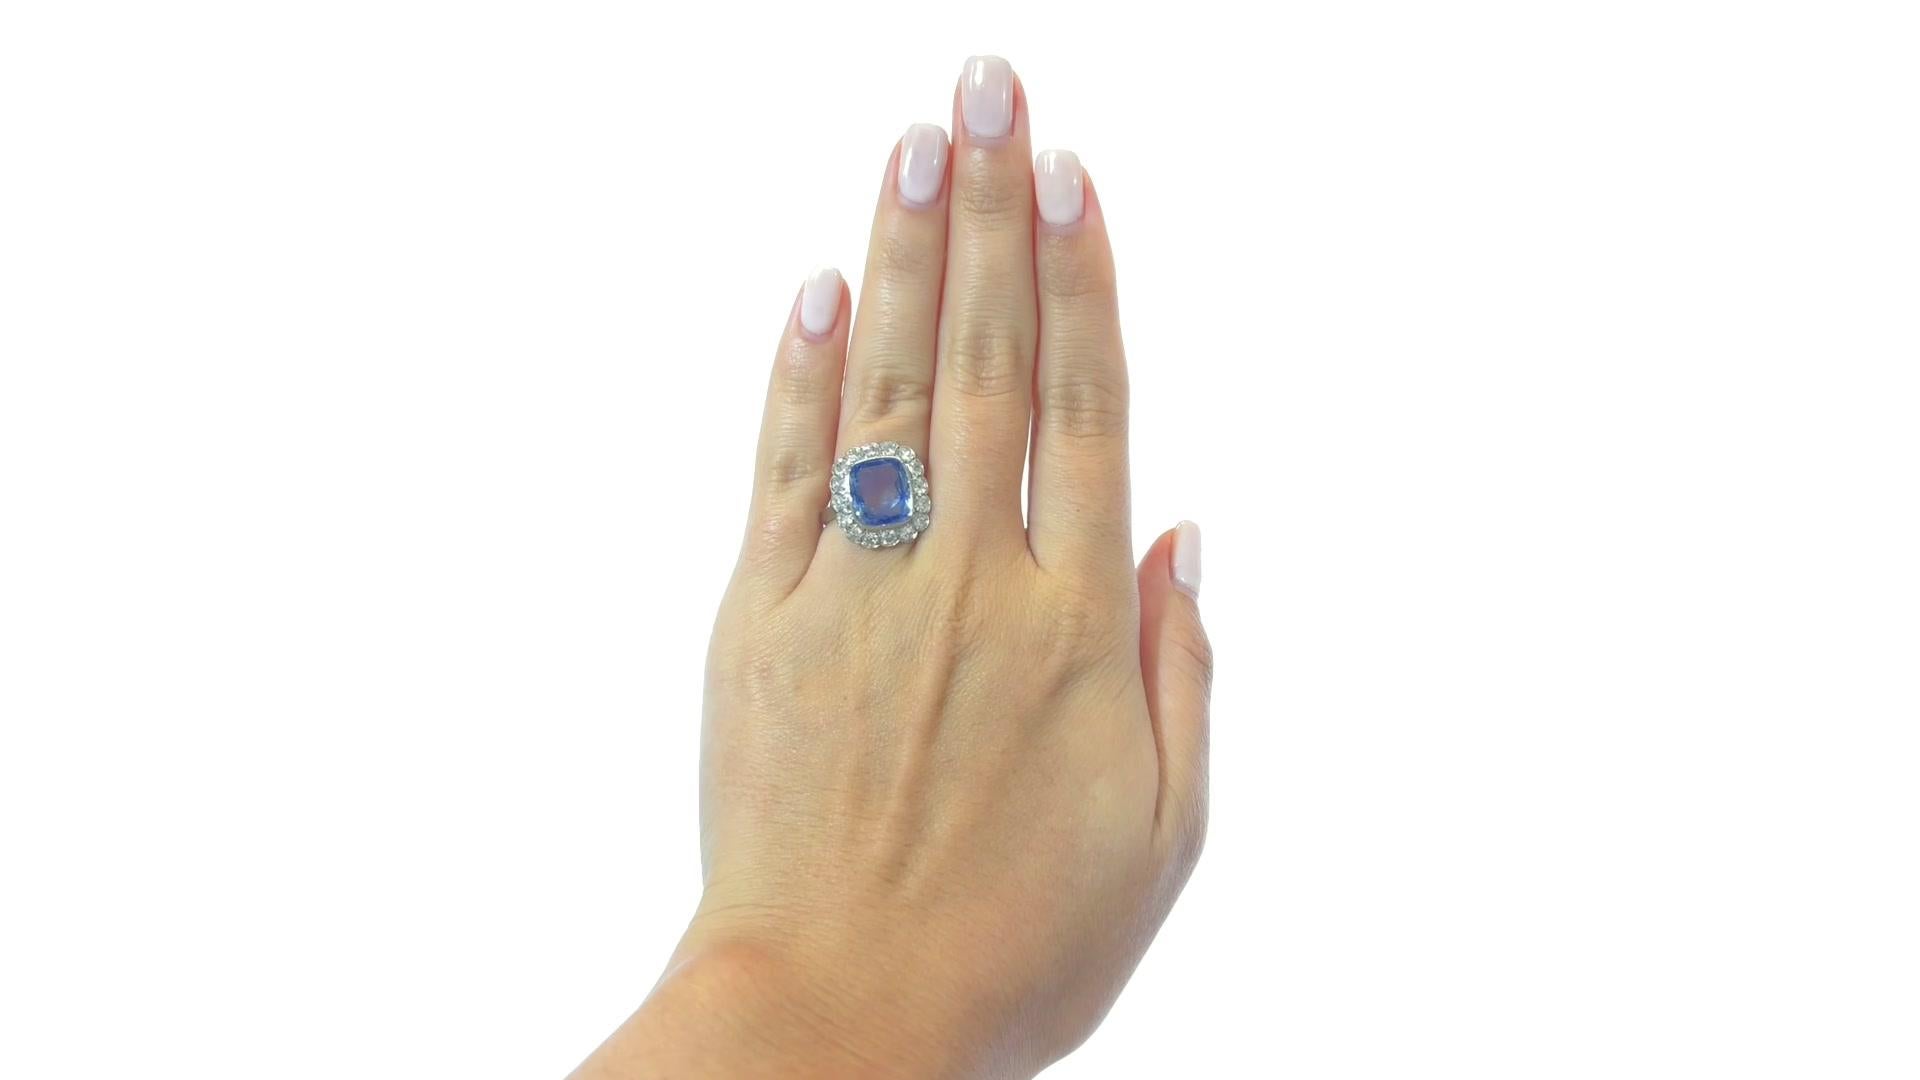 Vintage GIA French Sapphire Diamond Cluster Ring. The main gem is a GIA certified cushion cut sapphire Ceylon origin with no indications of heat or other treatments. Weight approximately 5.10 carats. Accented by 16 Old European Cut diamonds